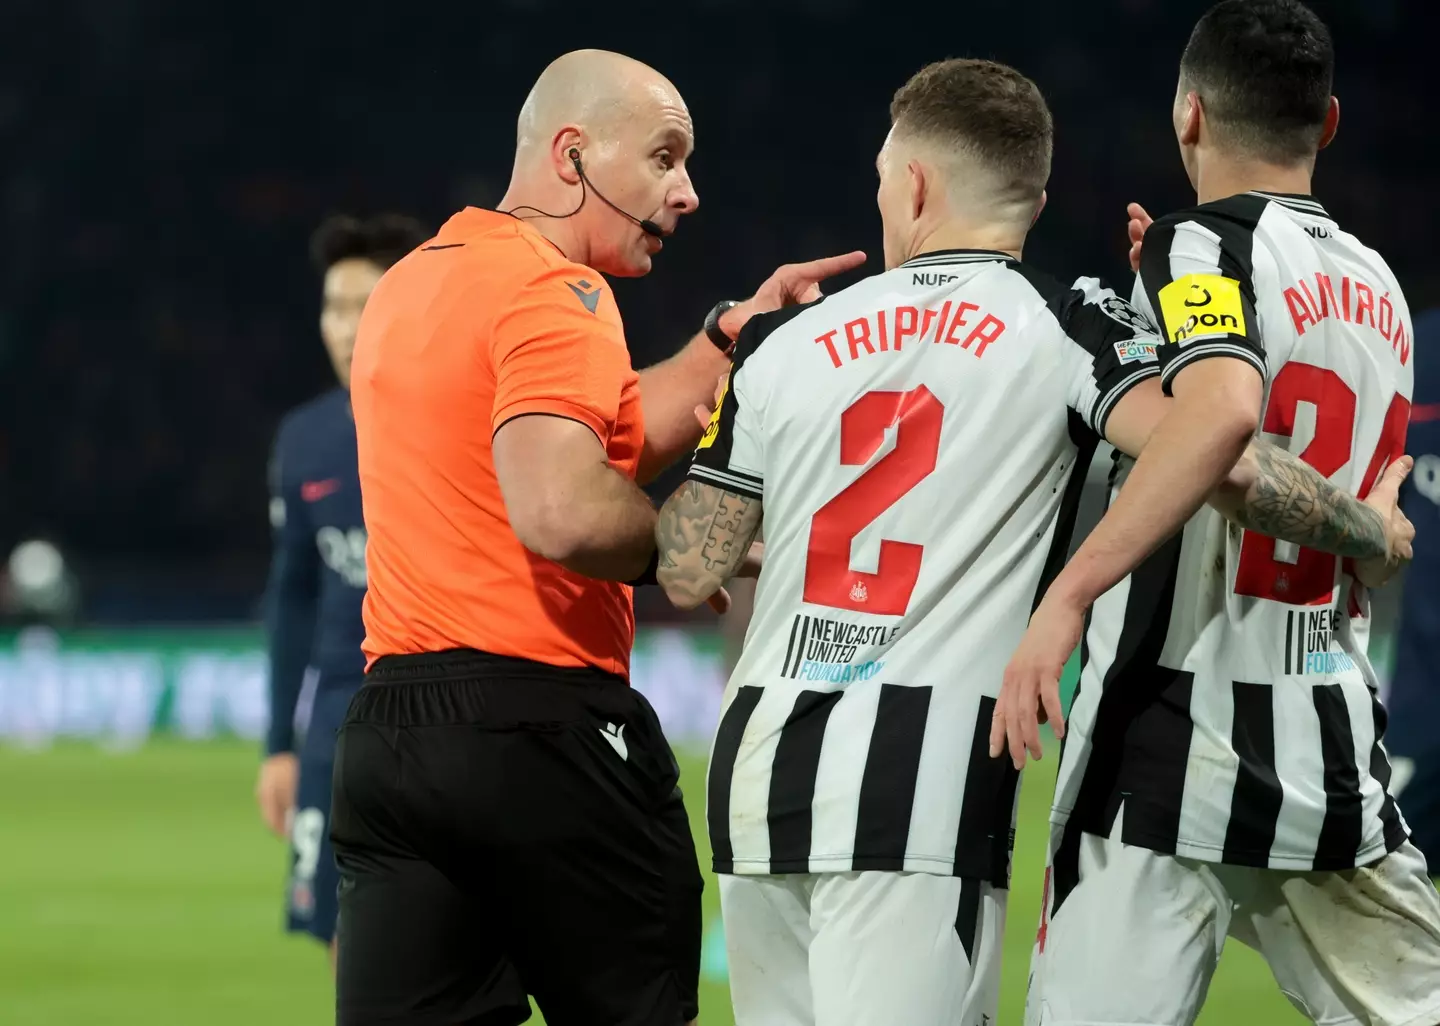 Kieran Trippier and Miguel Almiron couldn't believe the decision. (Image